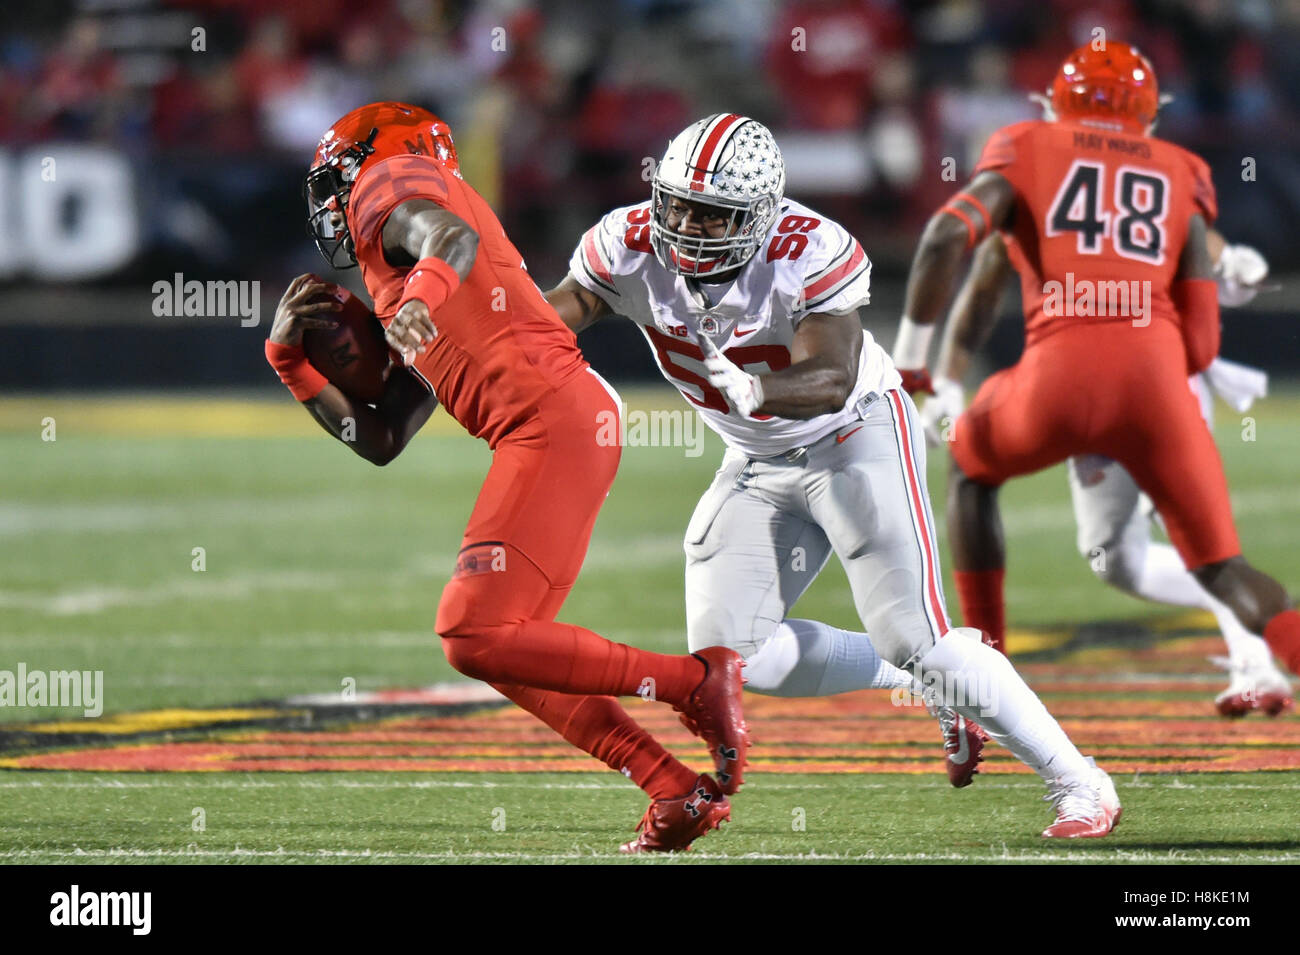 College Park, Maryland, USA. 12th Nov, 2016. Ohio State Buckeyes defensive end TYQUAN LEWIS (59) tries to tackle Maryland Terrapins quarterback TYRELL PIGROME (3) during a game played at Maryland Stadium at College Park, MD. Ohio State beat Maryland 62-3. © Ken Inness/ZUMA Wire/Alamy Live News Stock Photo